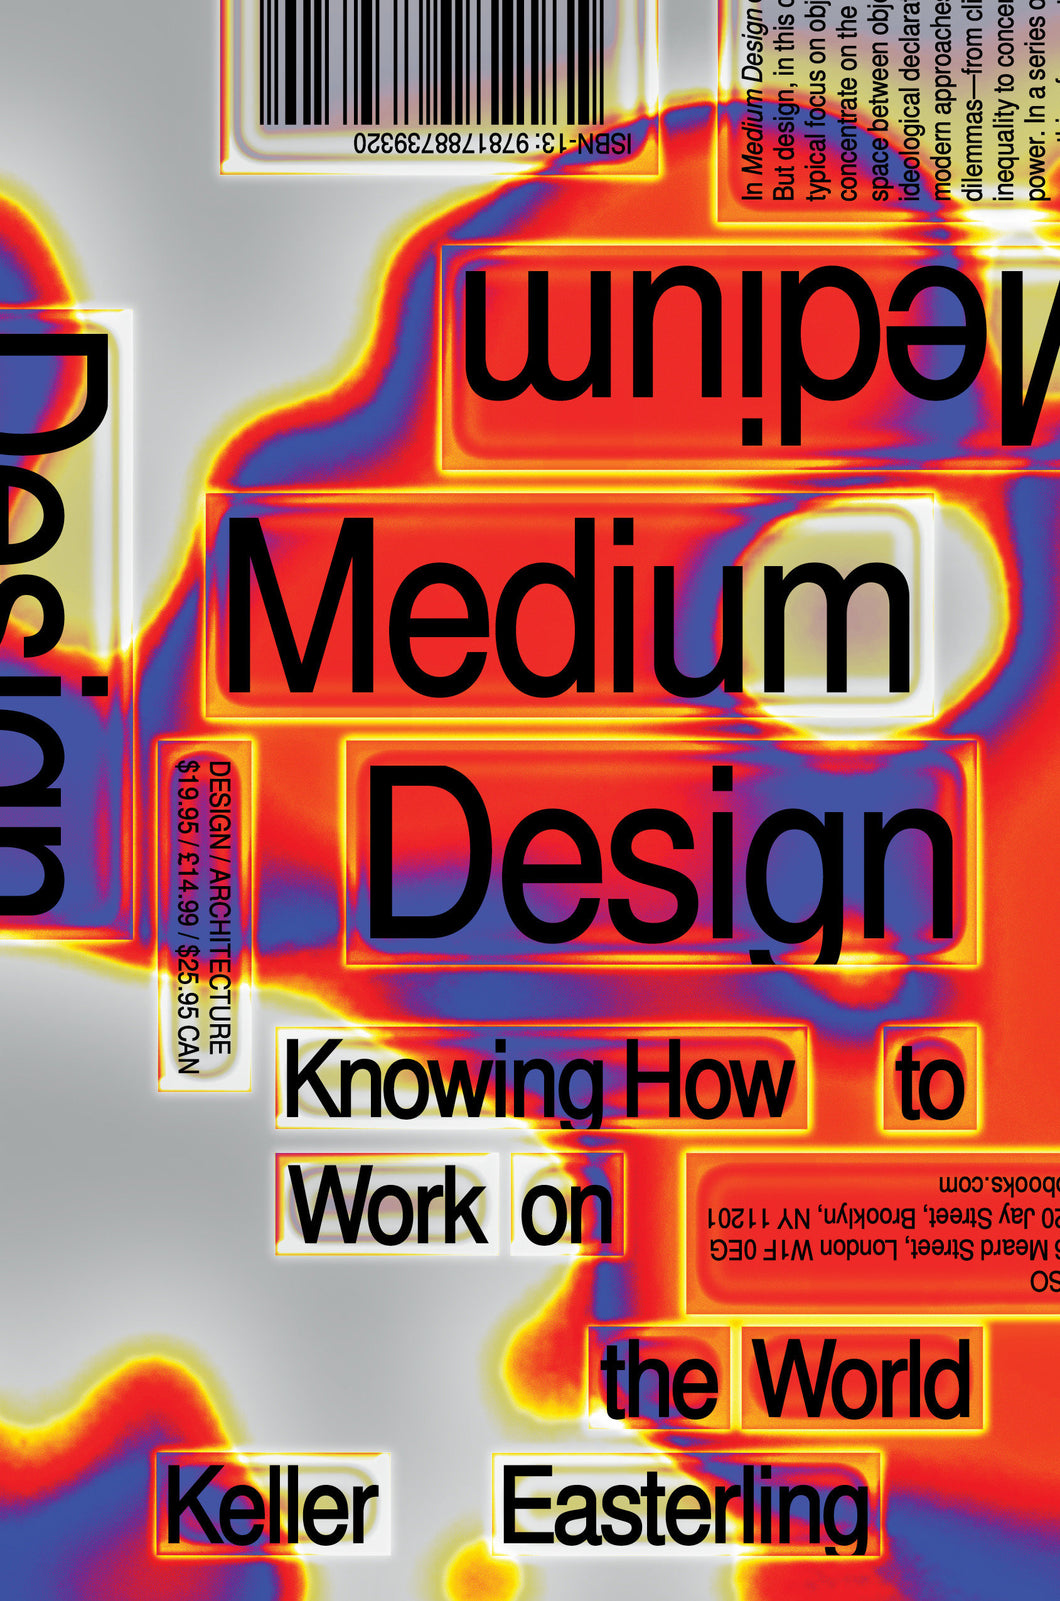 Medium Design: Knowing How to Work on the World